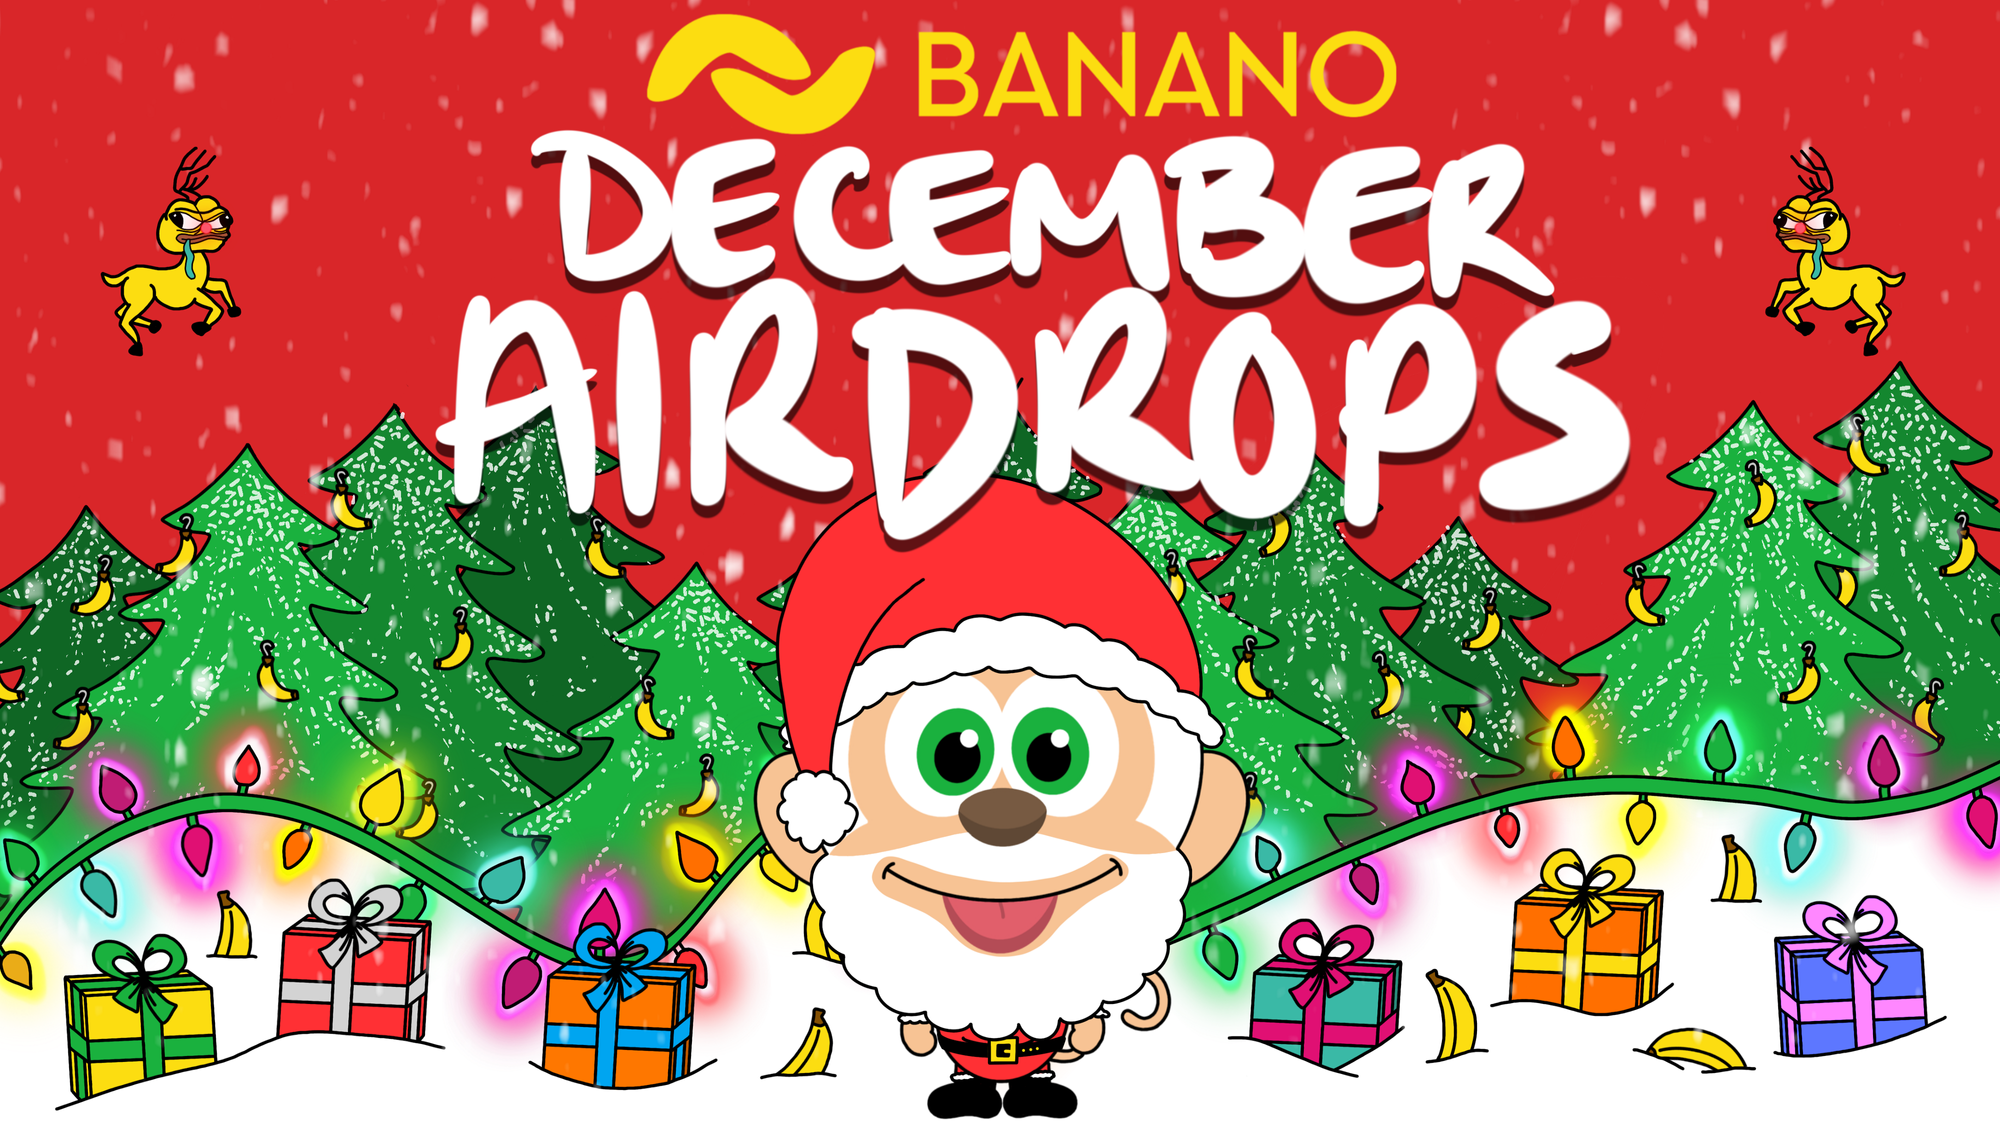 December Airdrops: BANANO Airdrop & free cryptomonKeys NFTs to all LBRY users!